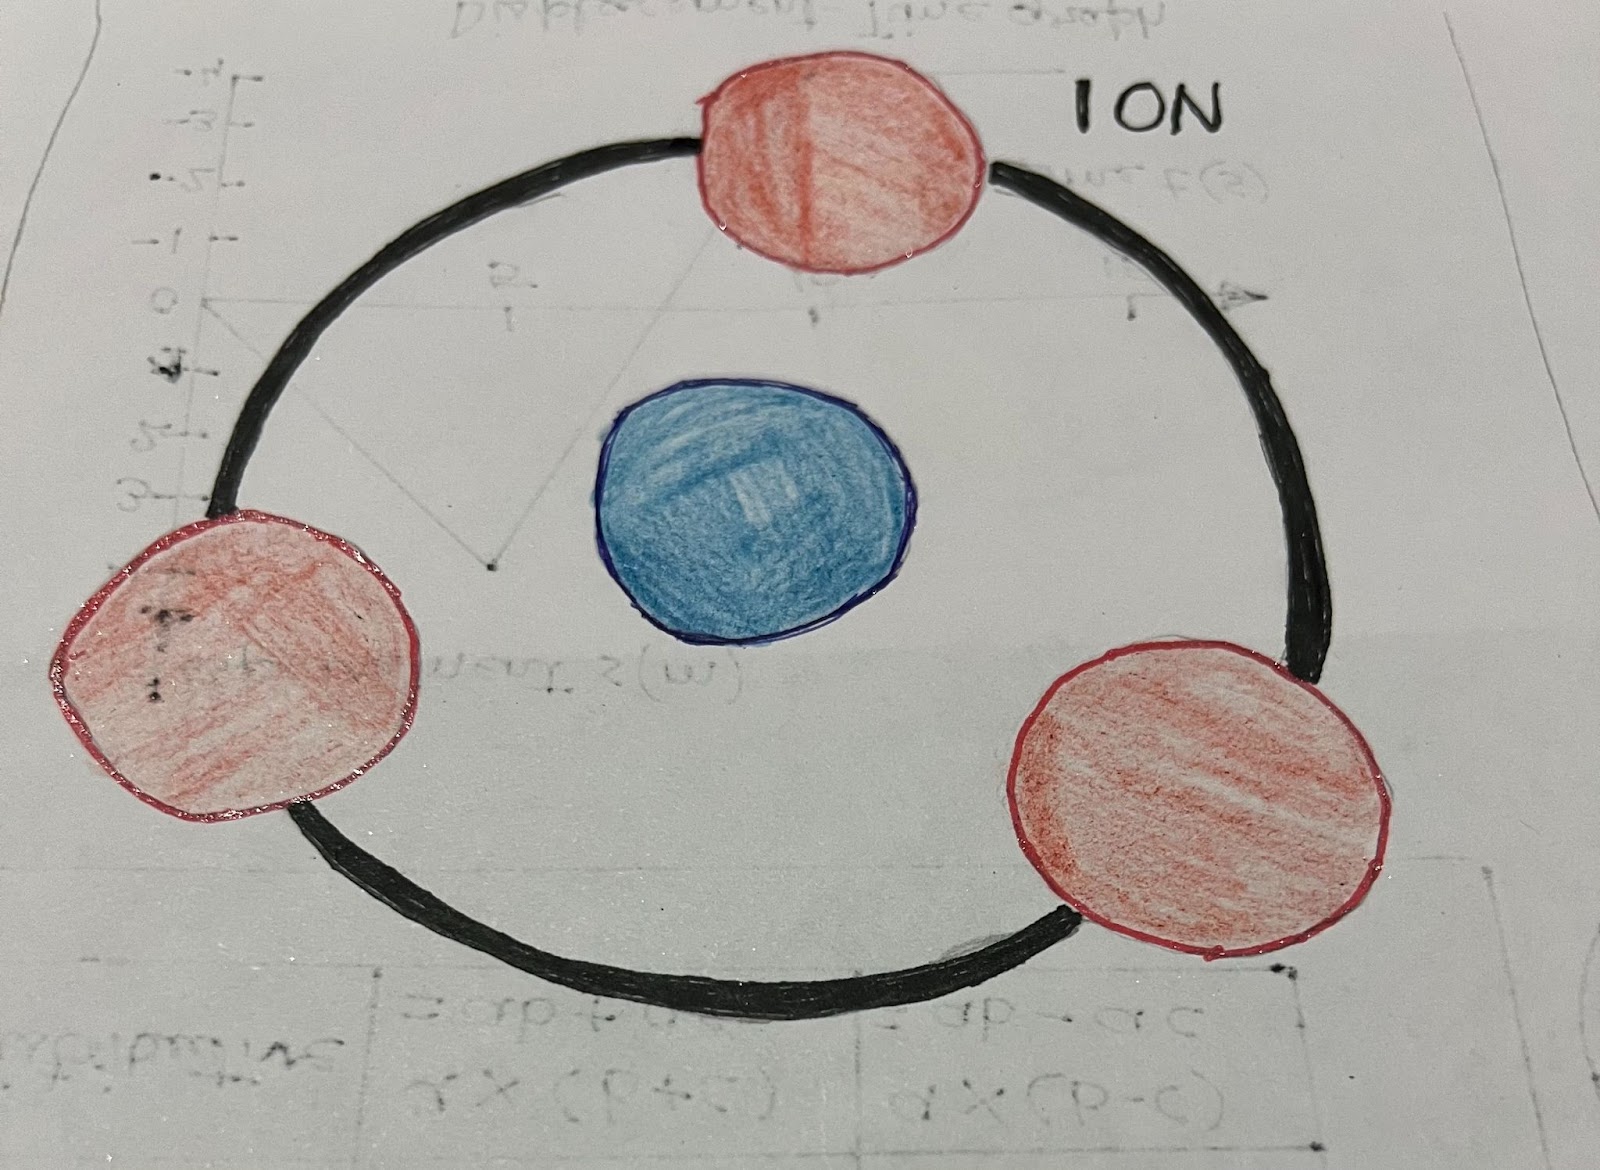 What is an ion?